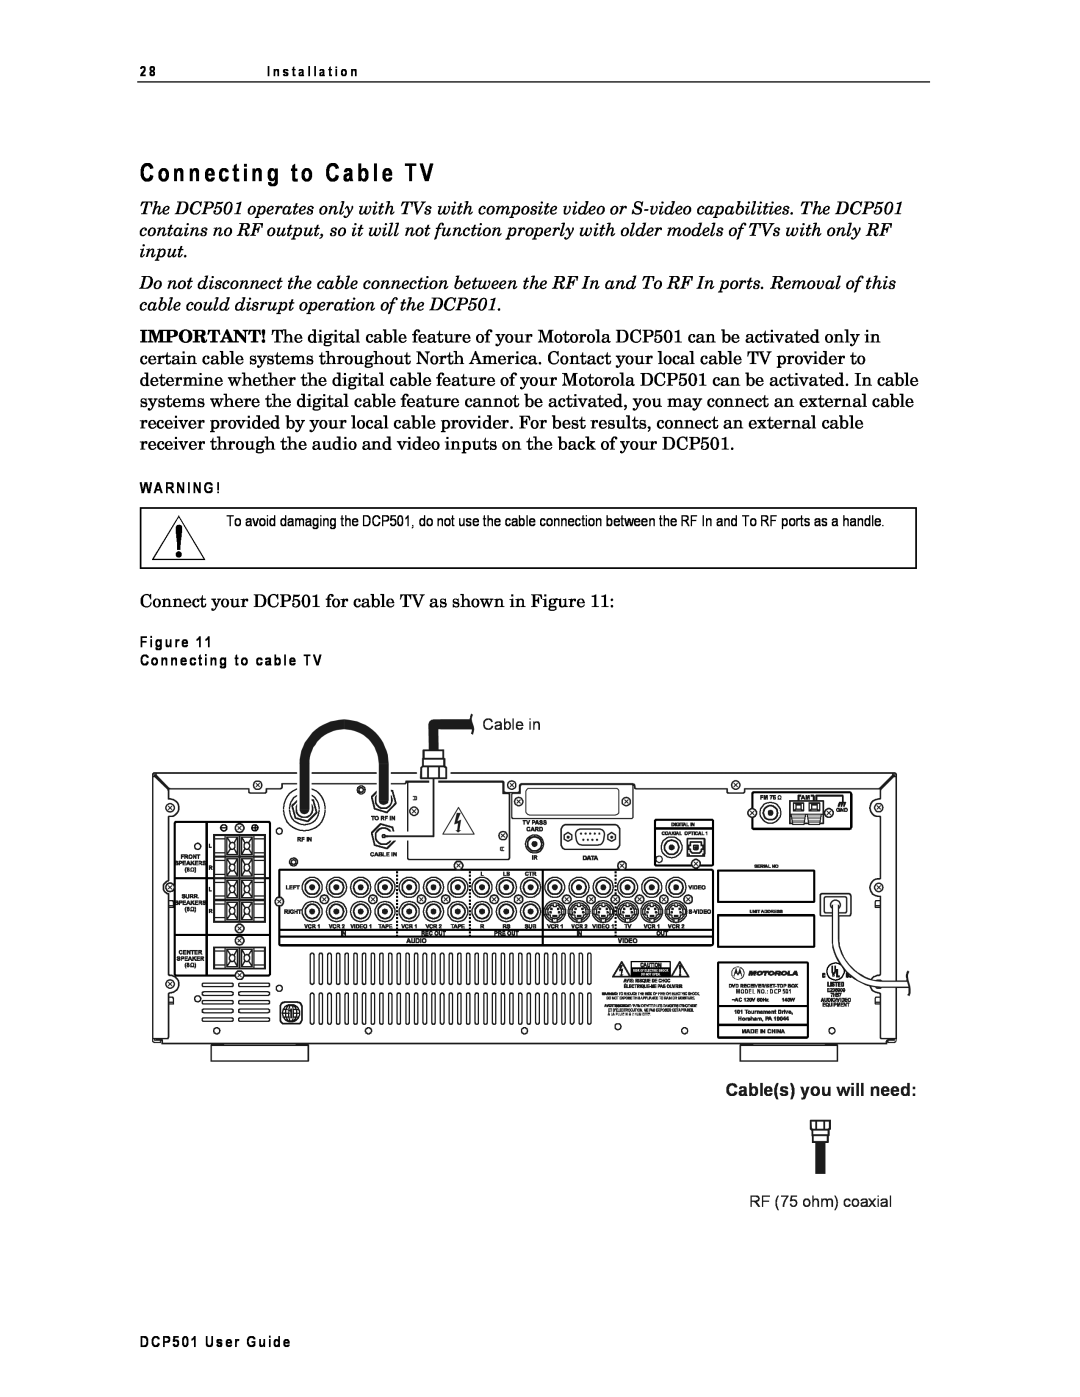 Motorola C o n n ec t i n g t o Ca b l e T, Cables you will need, Figure Connecting to cab le TV, DCP501 User Guide 